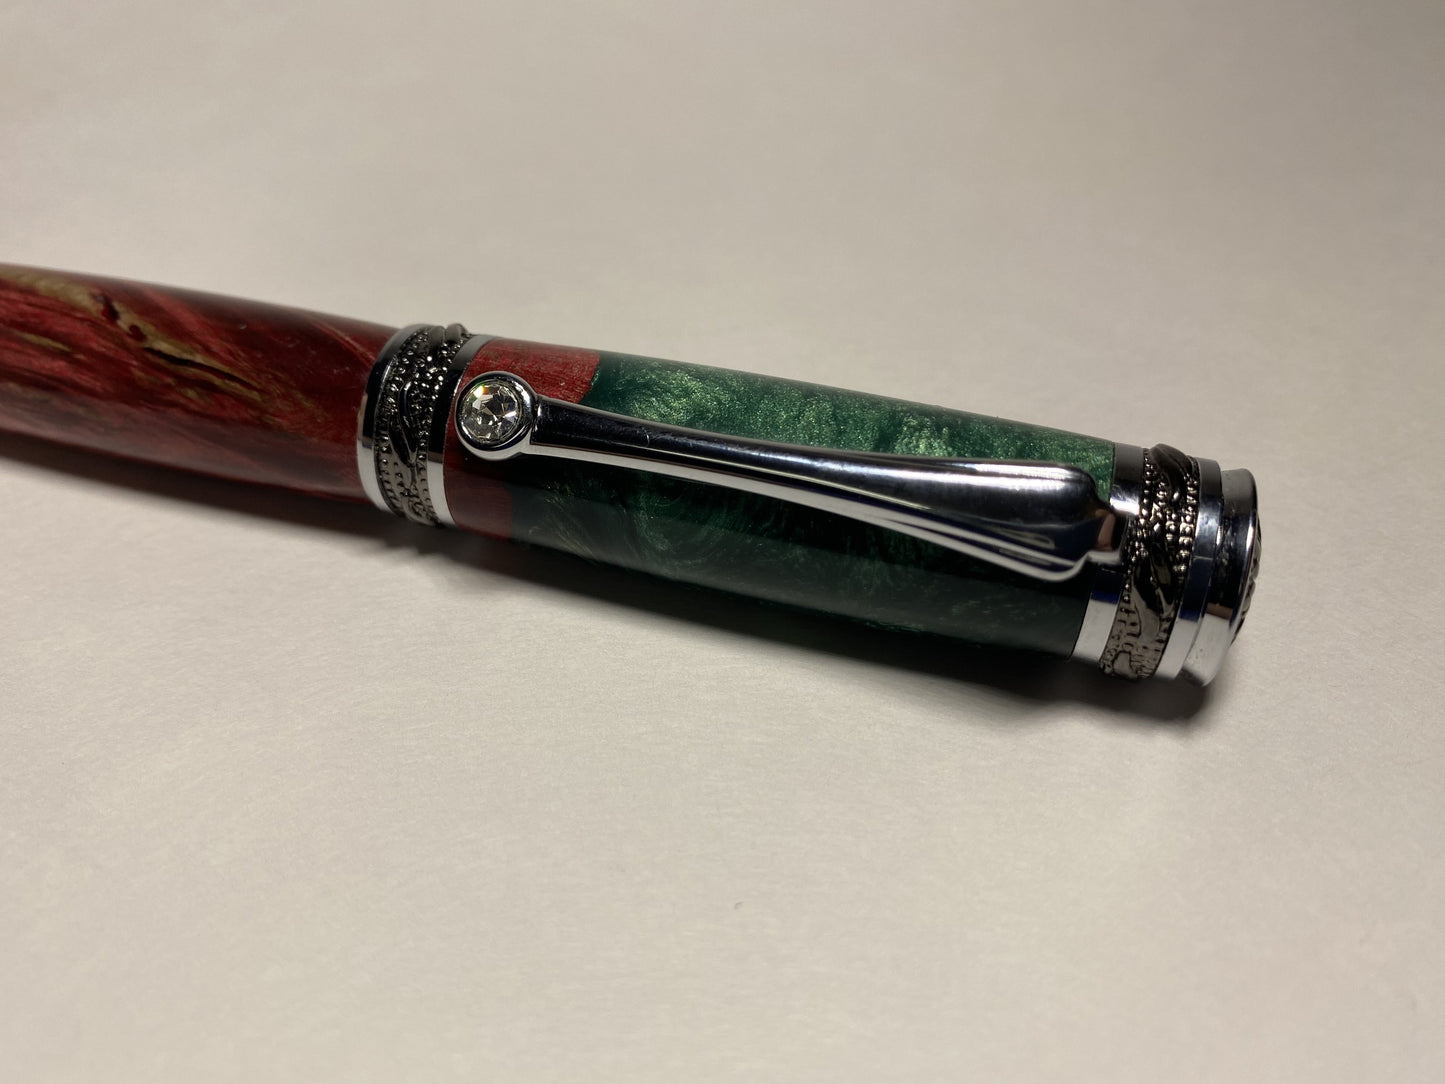 Majestic Red & Green Fountain Pen with Swarovski Crystal